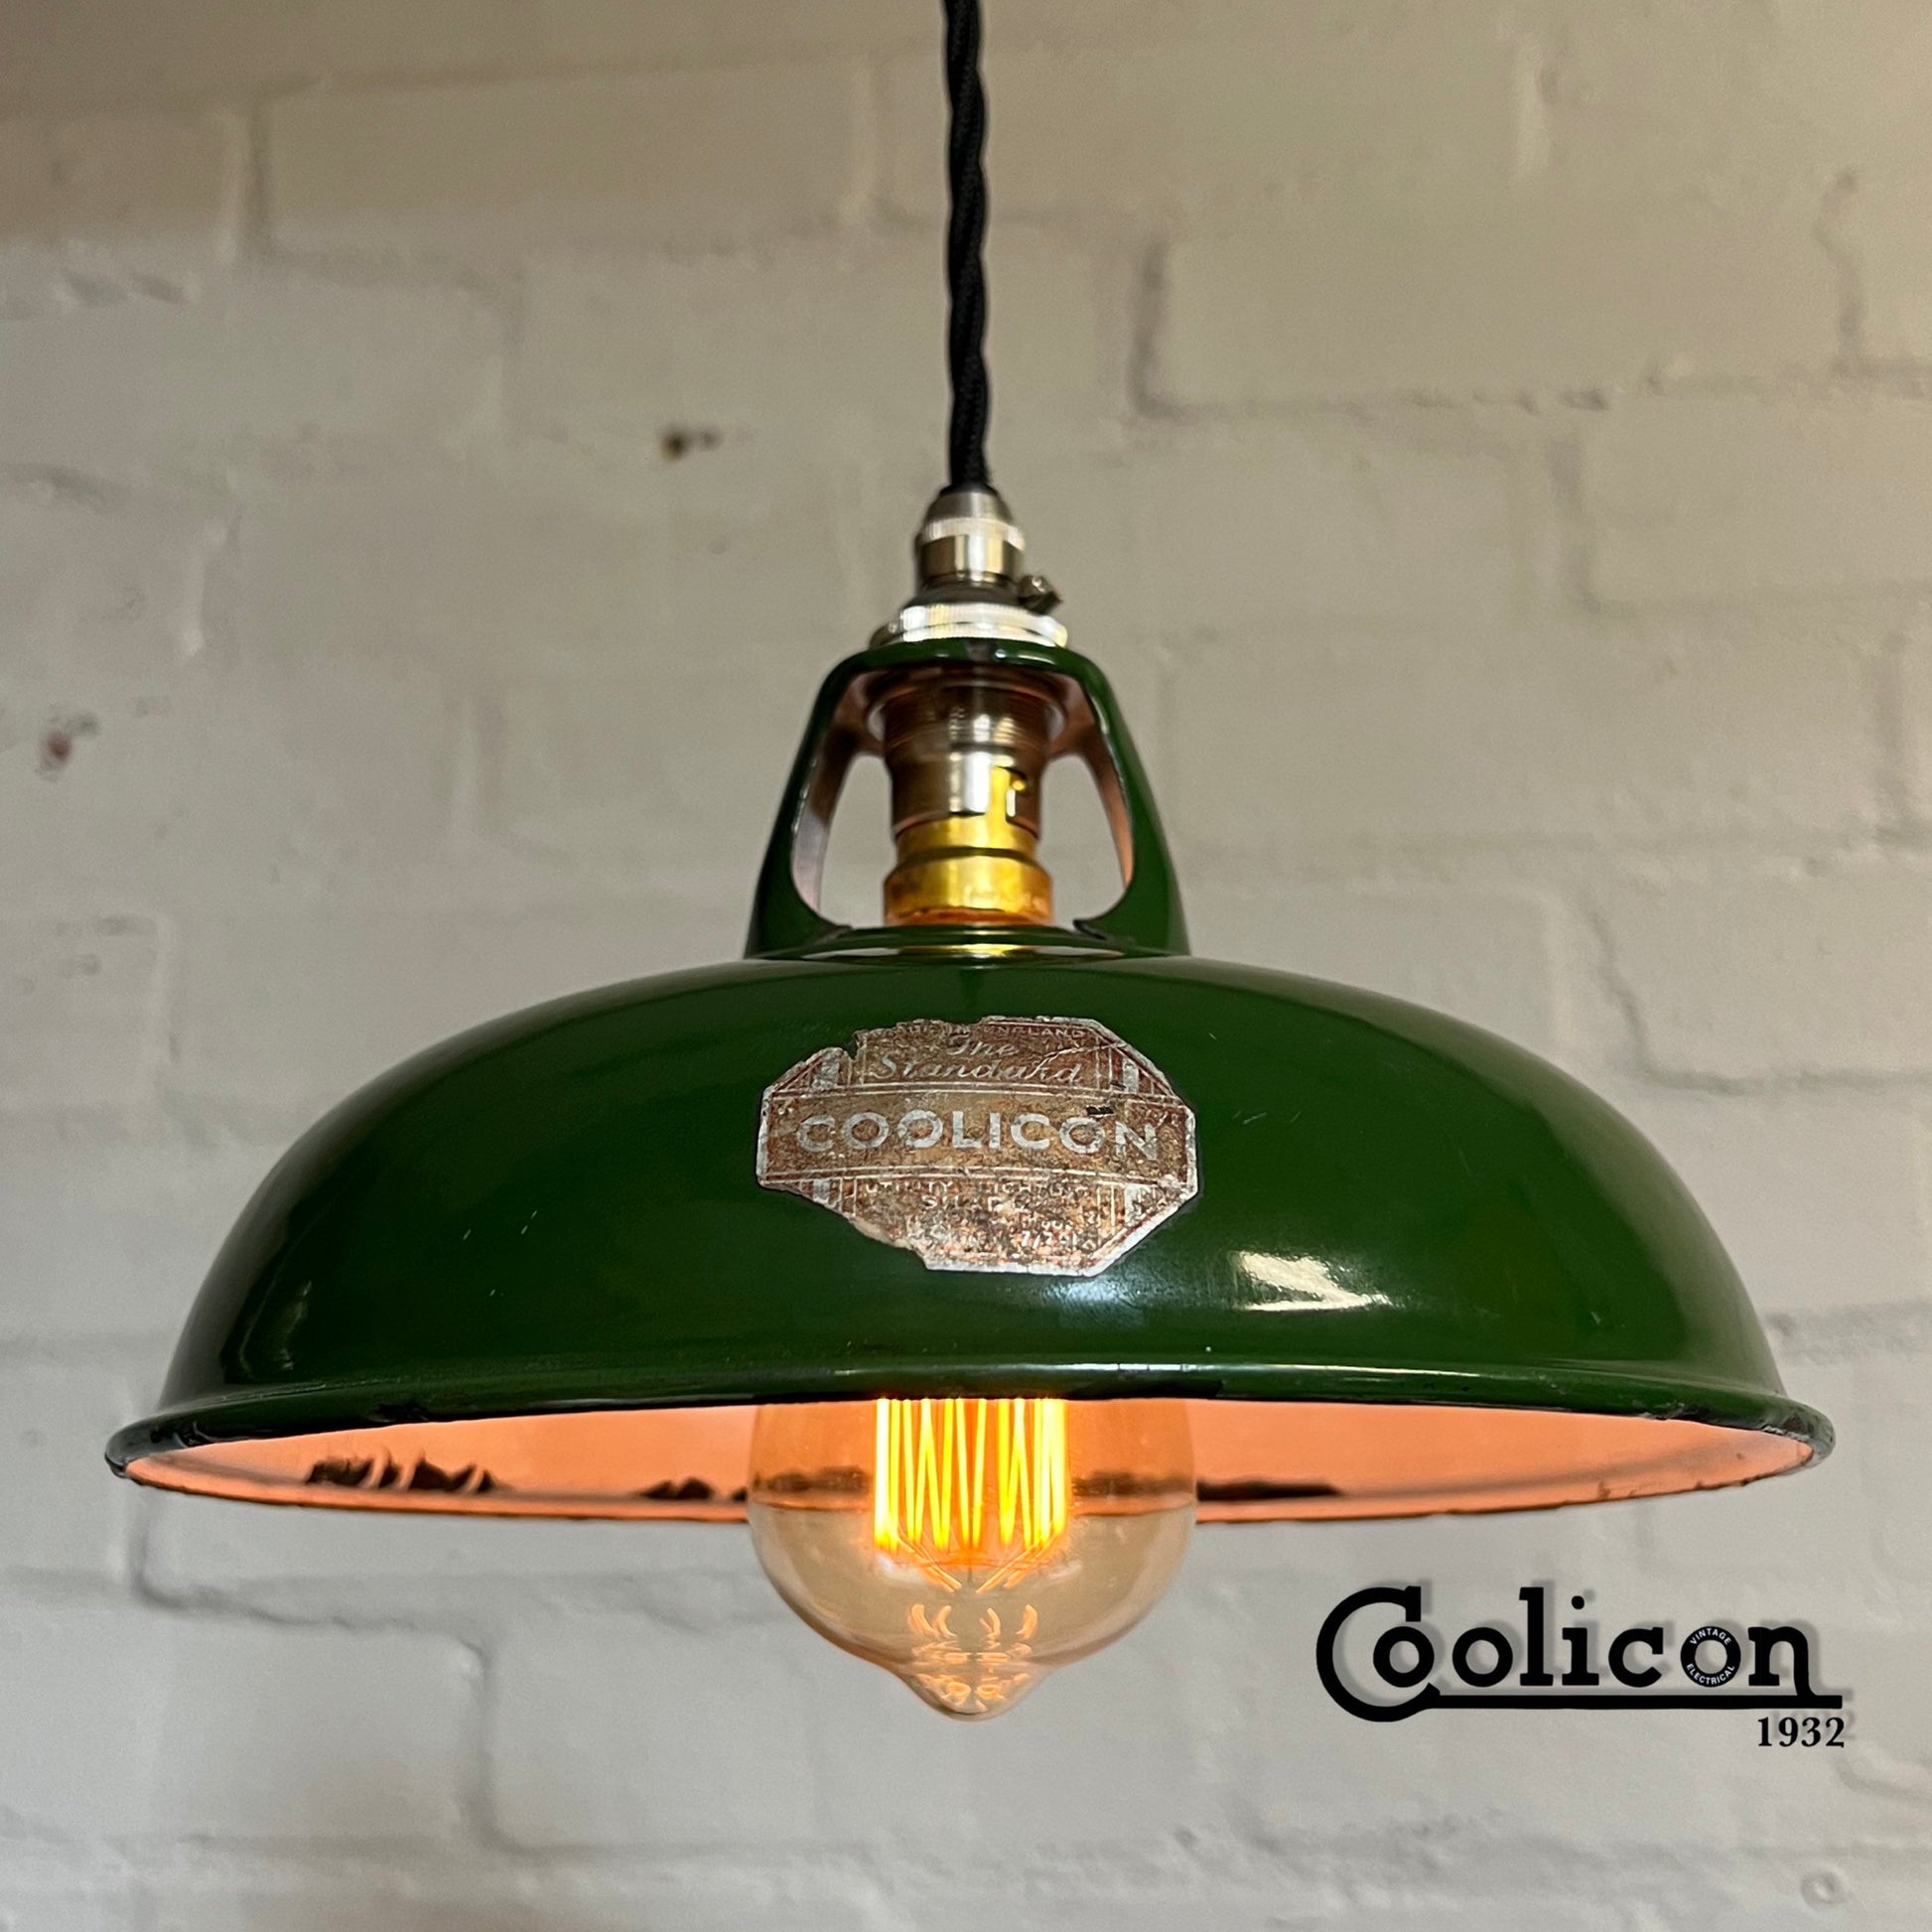 Geniune Green Solid Coolicon 1932 Shade Pendant Wire Set Light | 9 Inch | Ceiling Dining Room | Antique Restored | Kitchen Table | Vintage